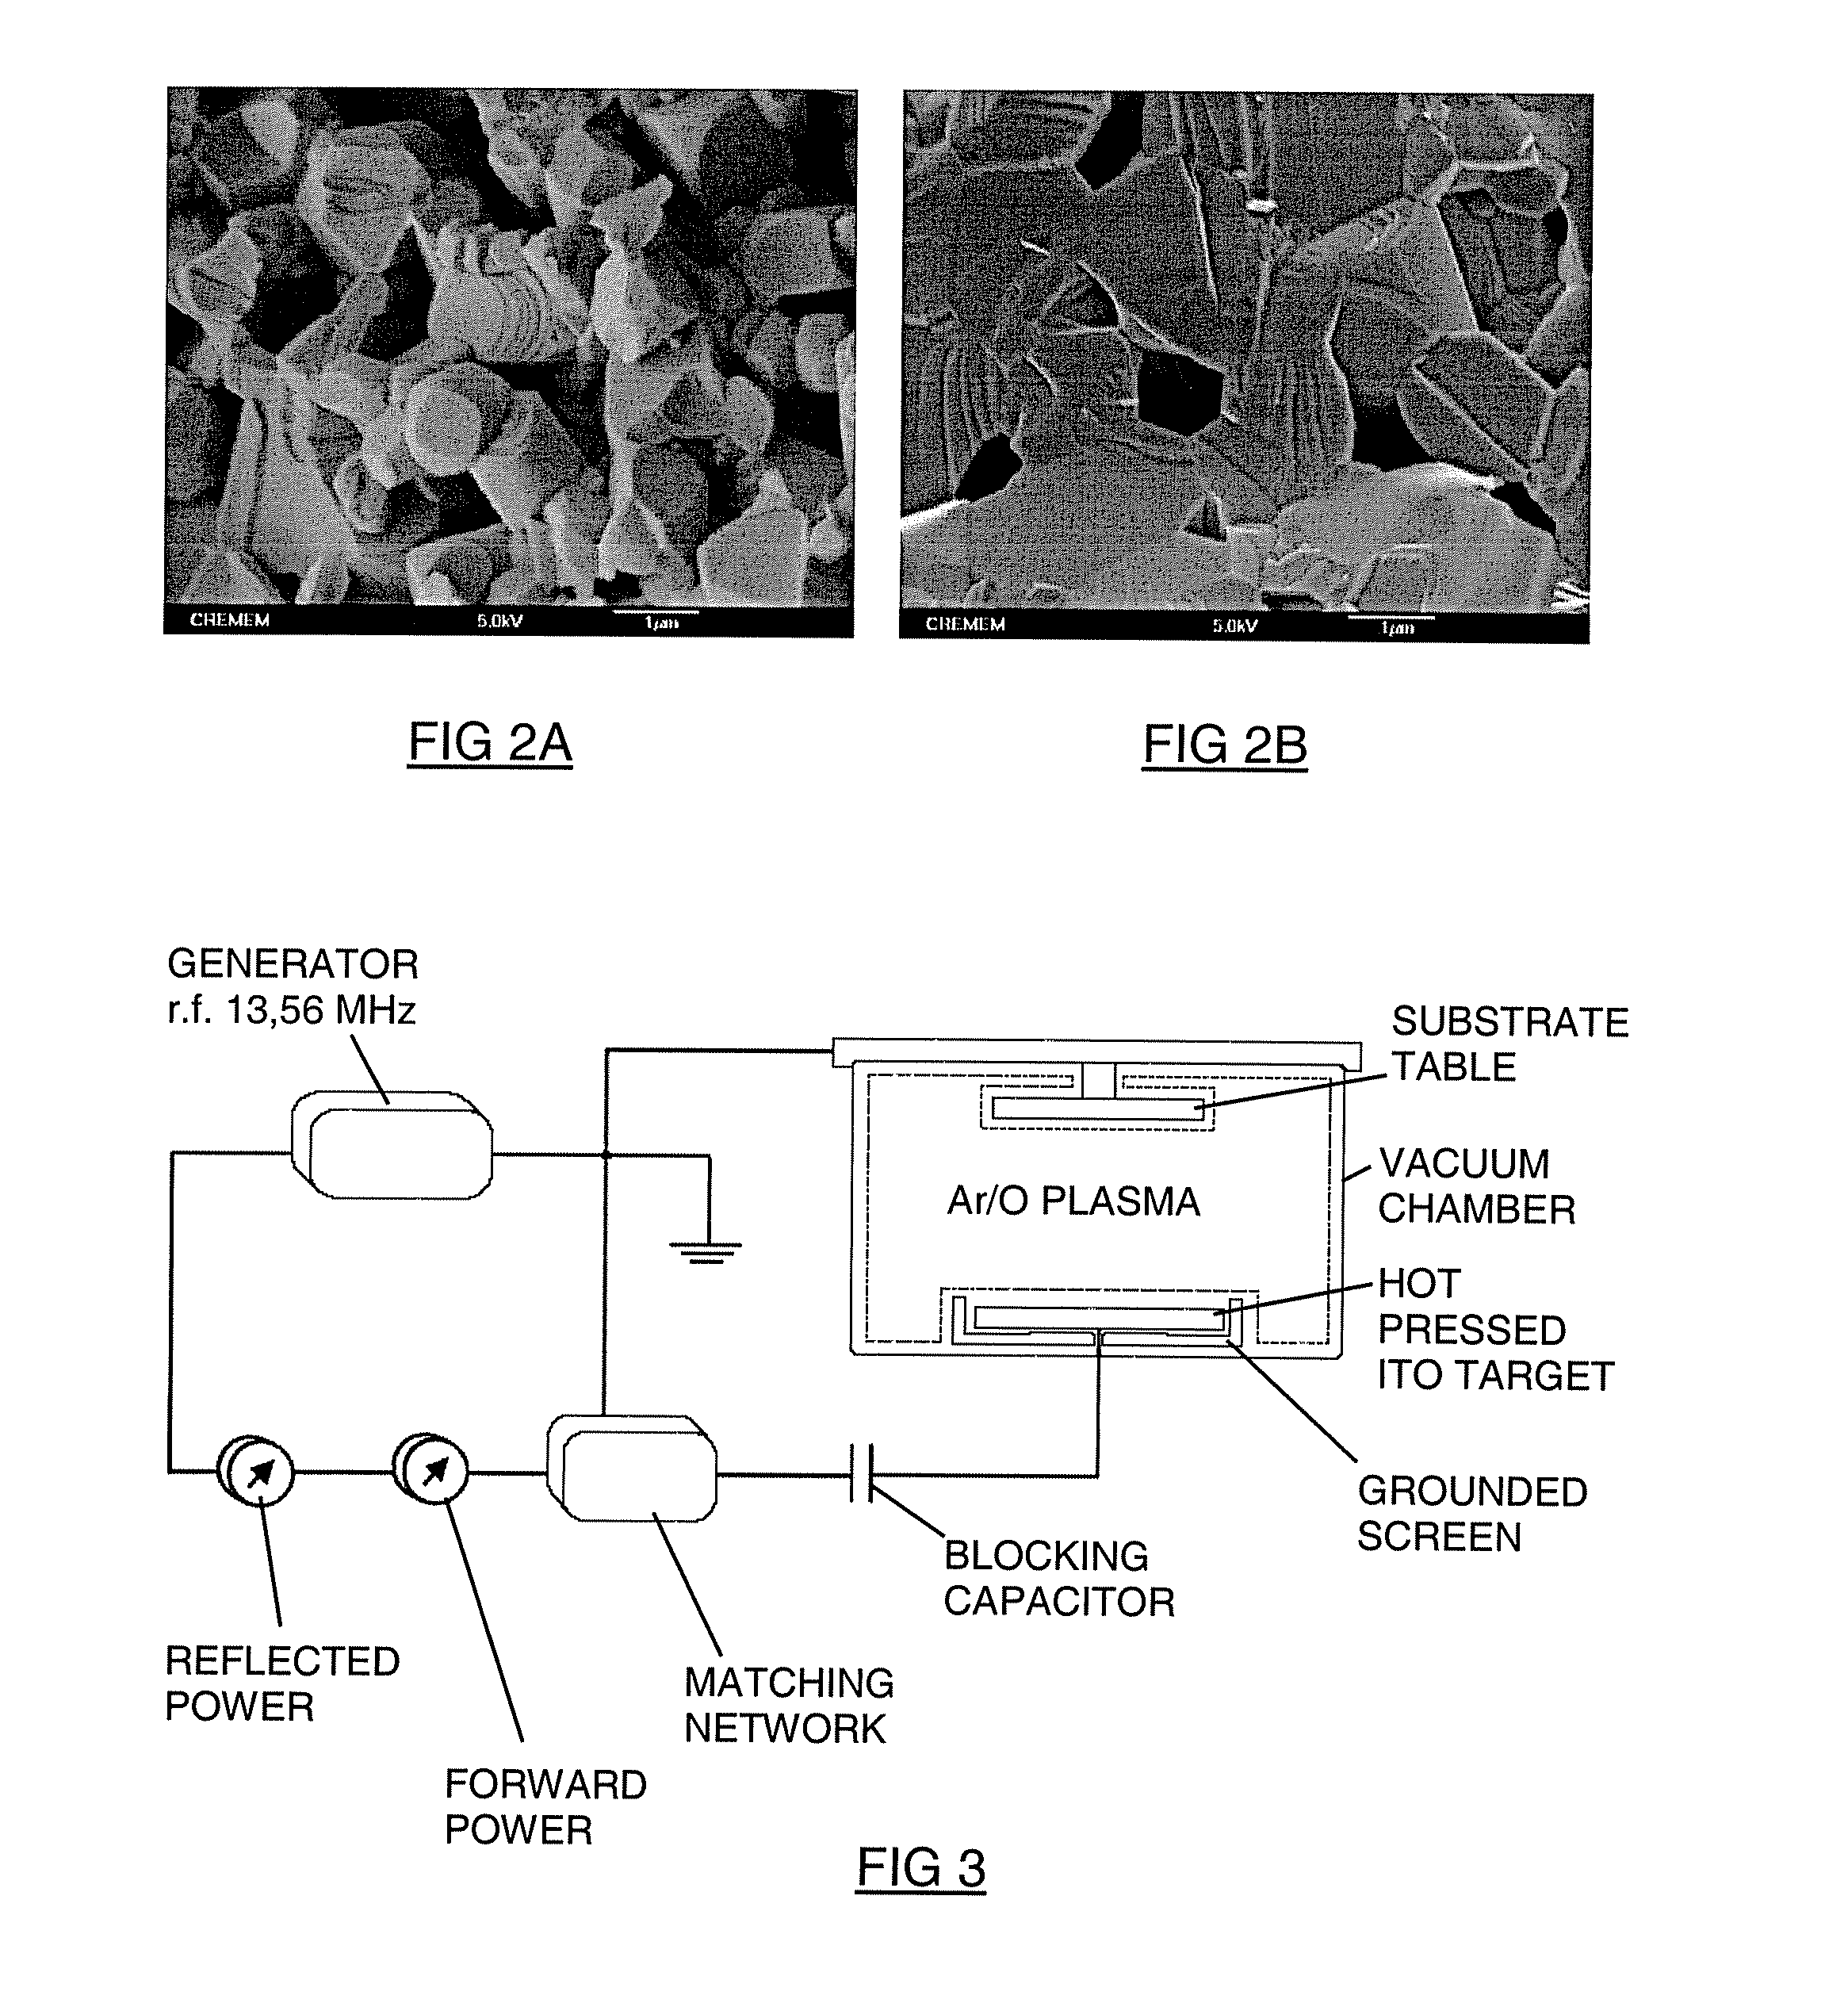 Process for preparing ceramics, ceramics thus obtained and uses thereof, especially as a sputtering target